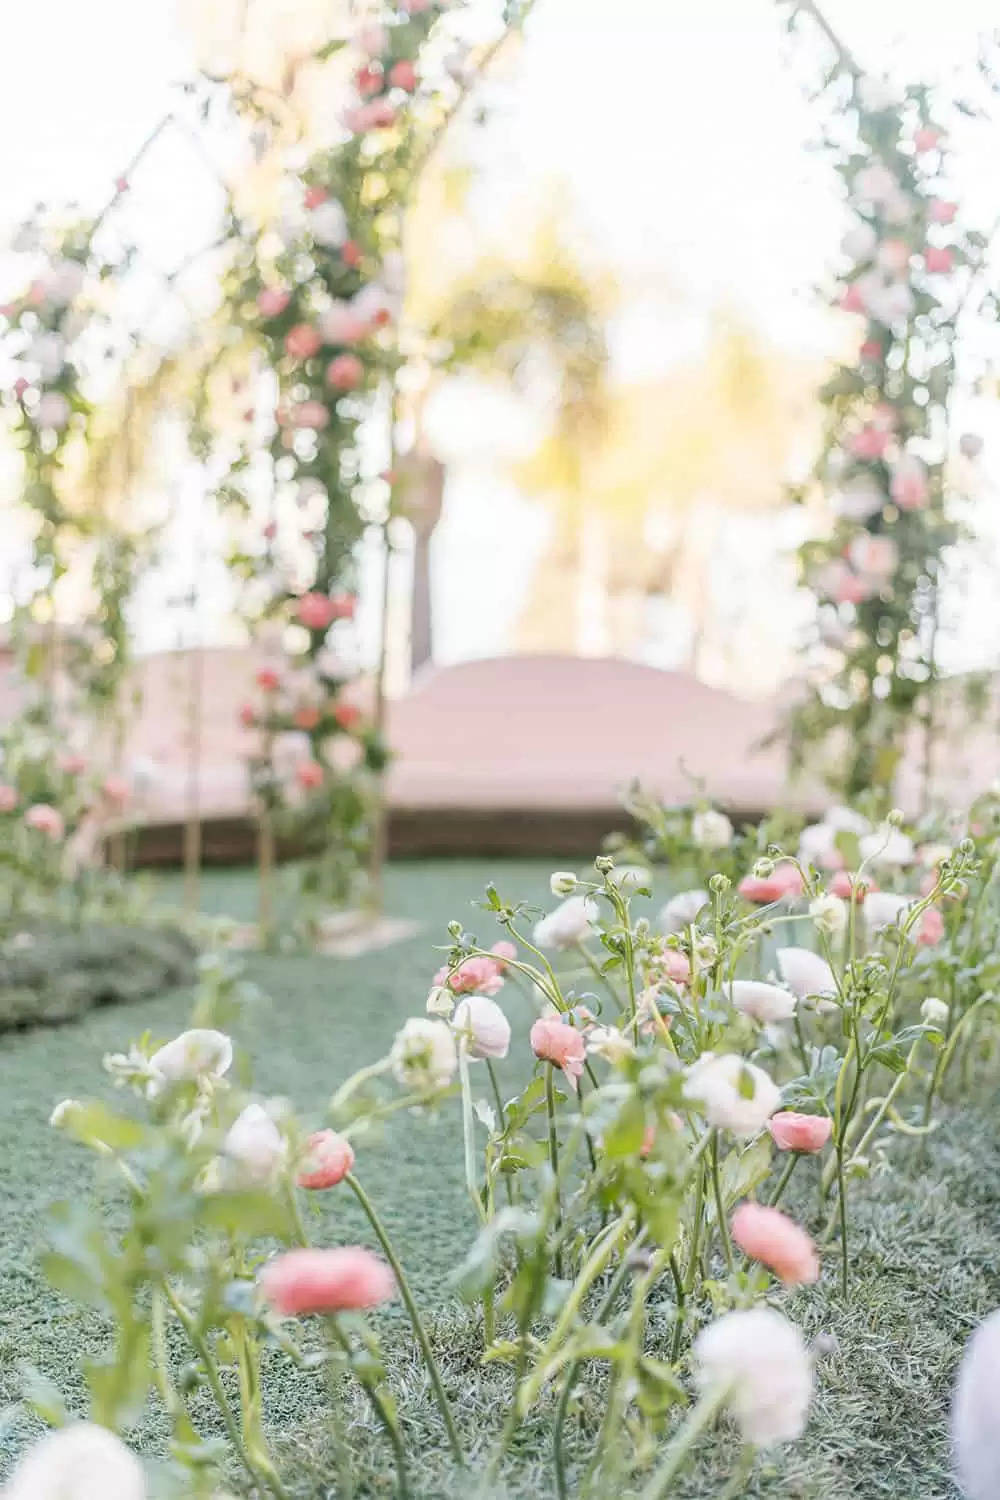 Intimate La Valencia Resort Marriage ceremony Editorial with a Backyard Luxe Really feel ⋆ Ruffled